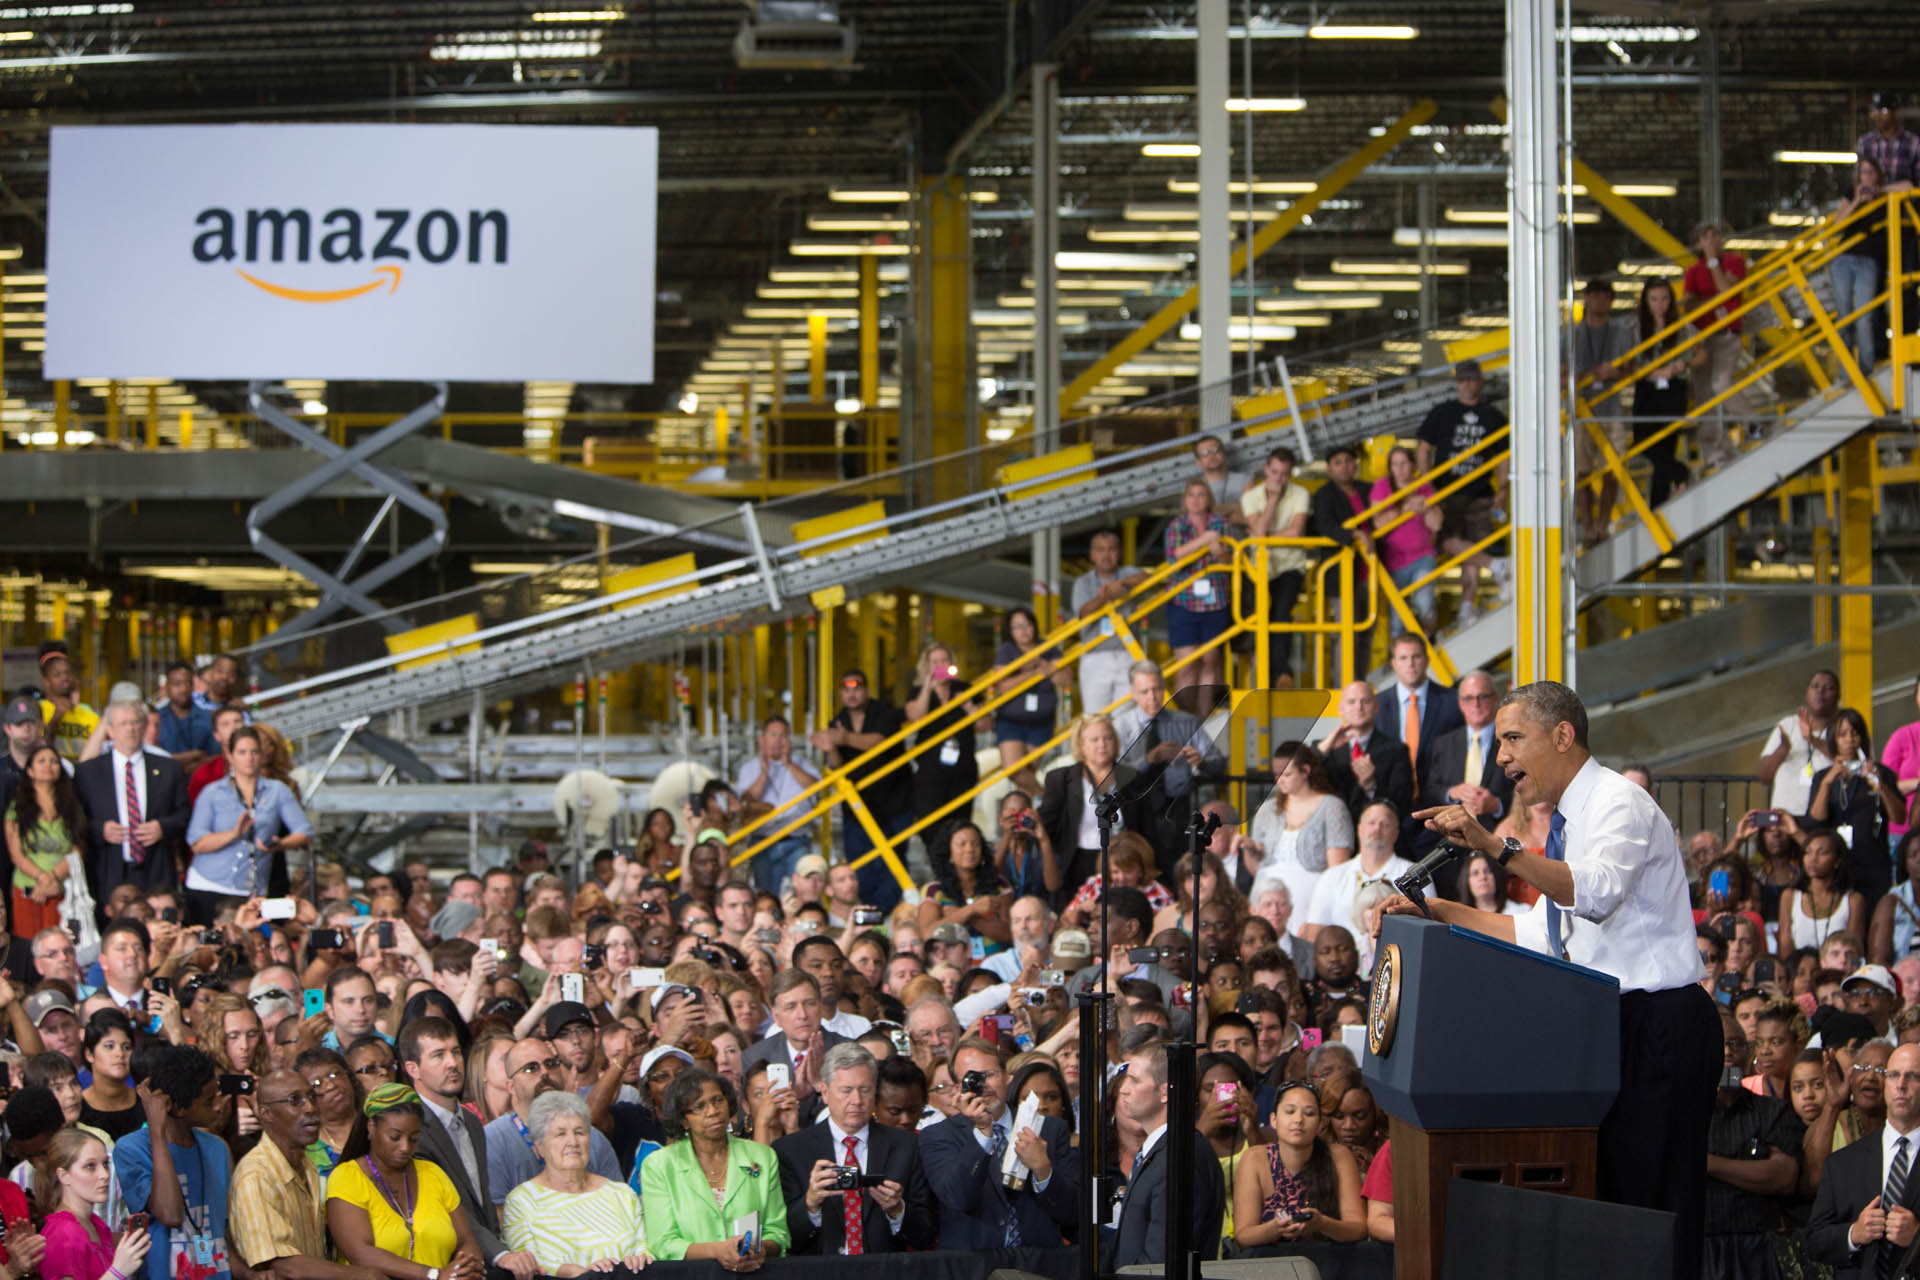 President Barack Obama delivers remarks on the economy at the Amazon Chattanooga Fulfillment Center